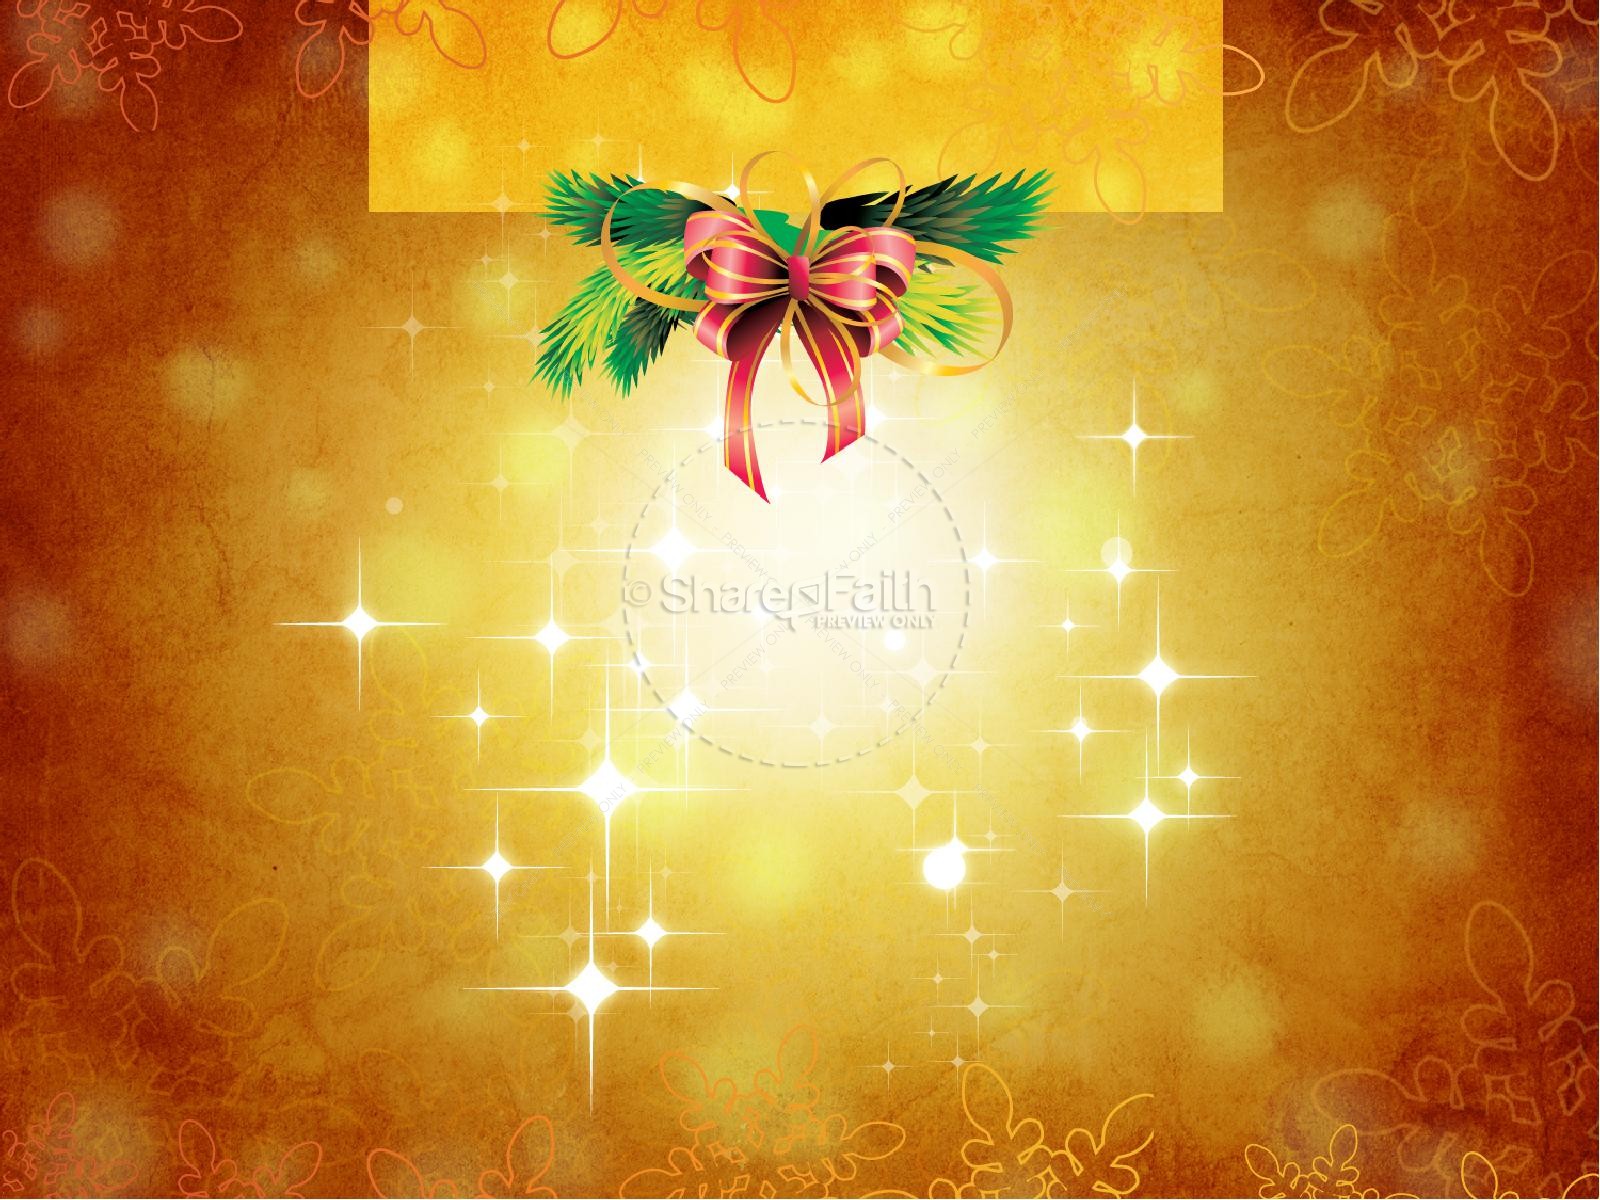 christ-in-christmas-powerpoint-template-christmas-powerpoints